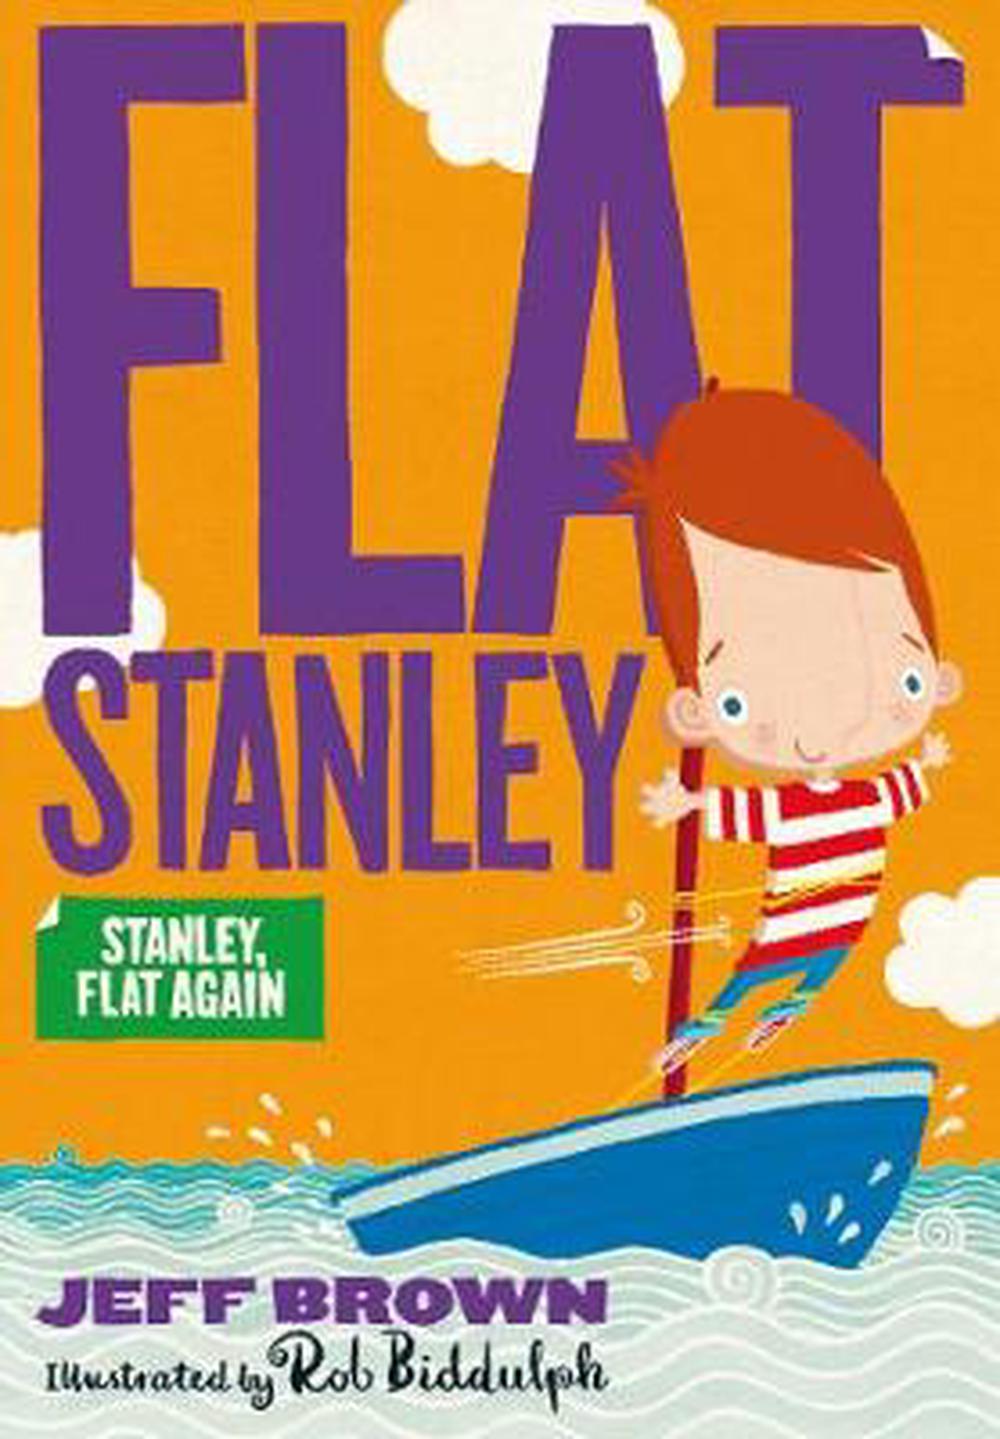 Stanley Flat Again! by Jeff Brown (English) Paperback Book Free ...